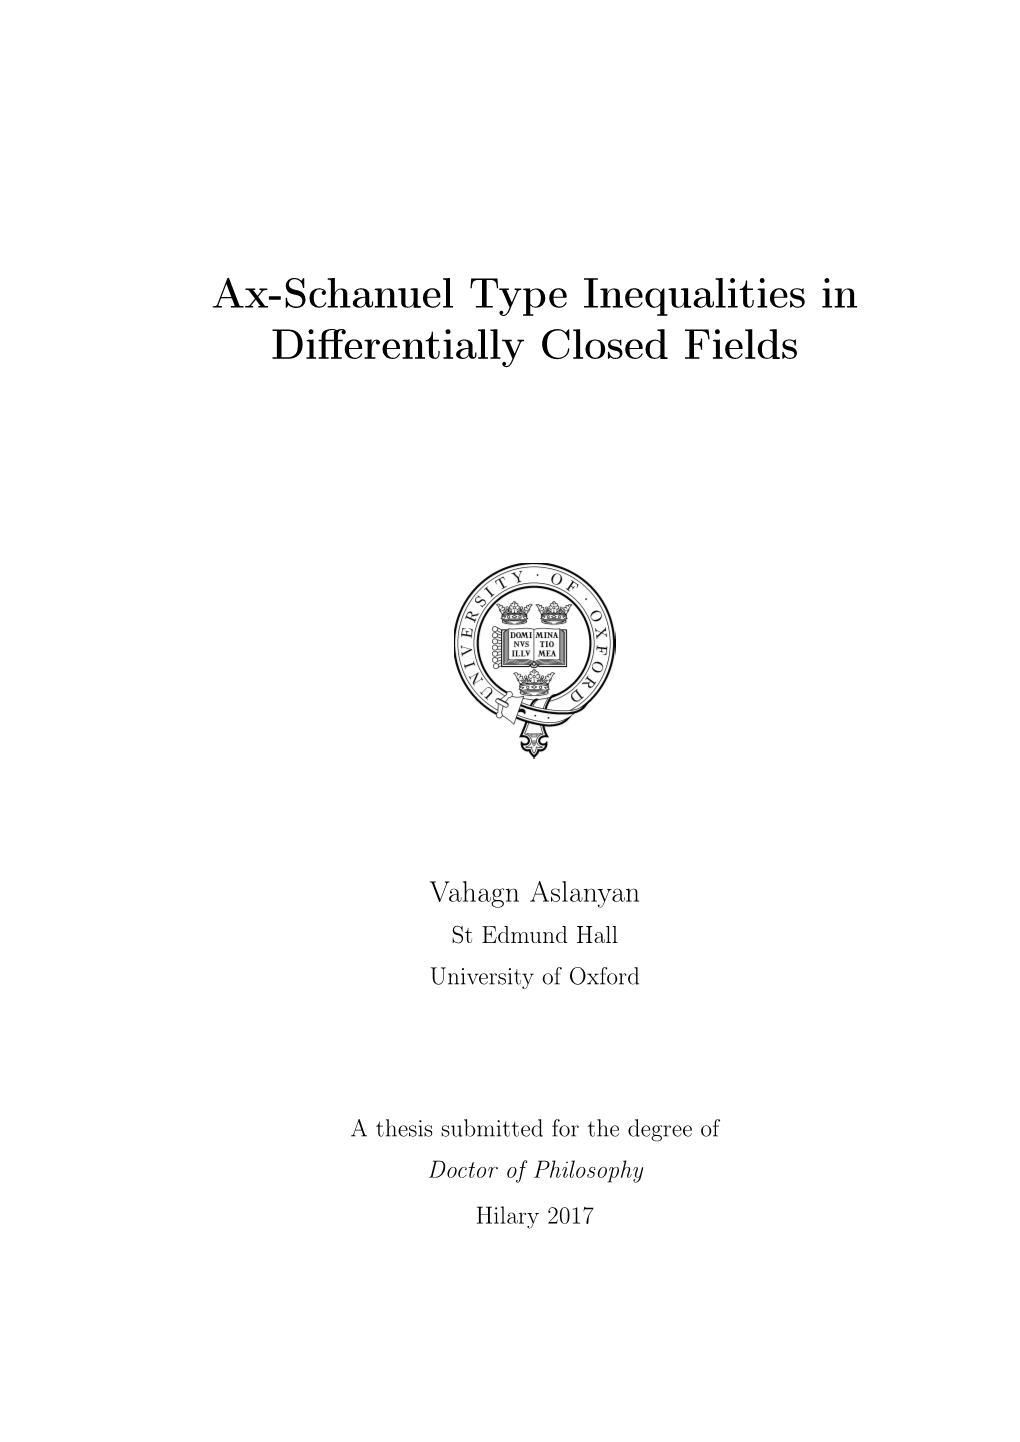 Ax-Schanuel Type Inequalities in Differentially Closed Fields